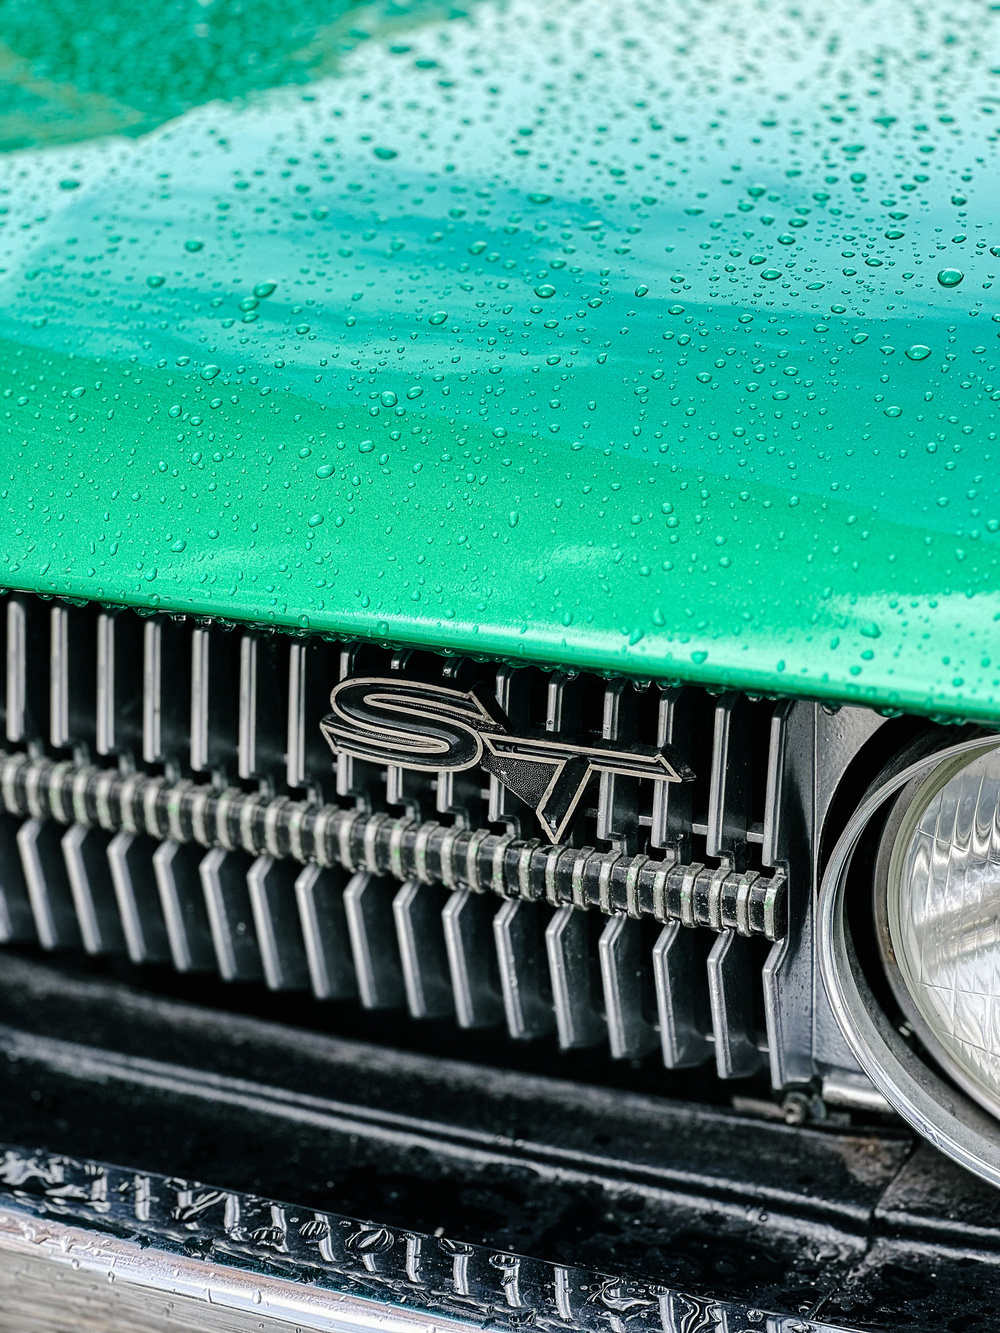 Close-up of a green car&rsquo;s front end with water droplets, featuring the grille and an &ldquo;ST&rdquo; badge next to a headlight.